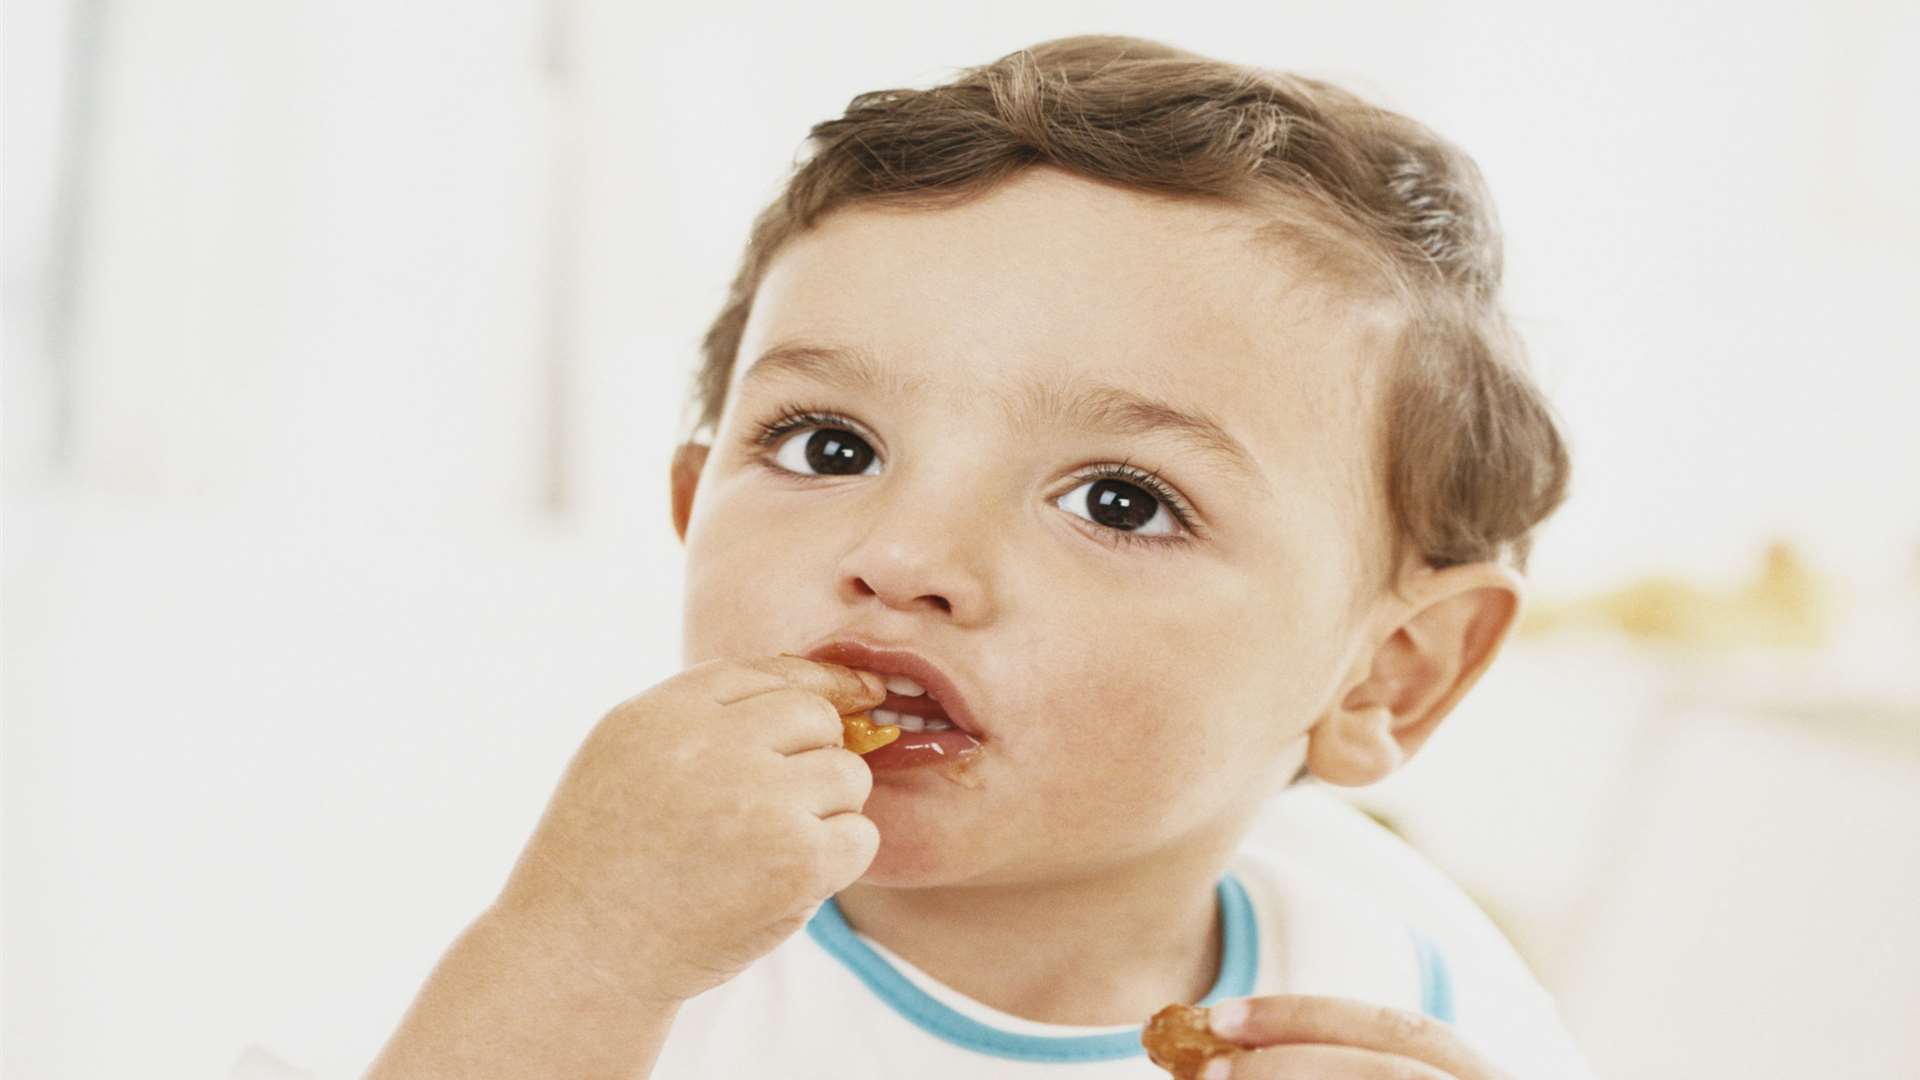 Only 25% of parents worry their child might become overweight in the future